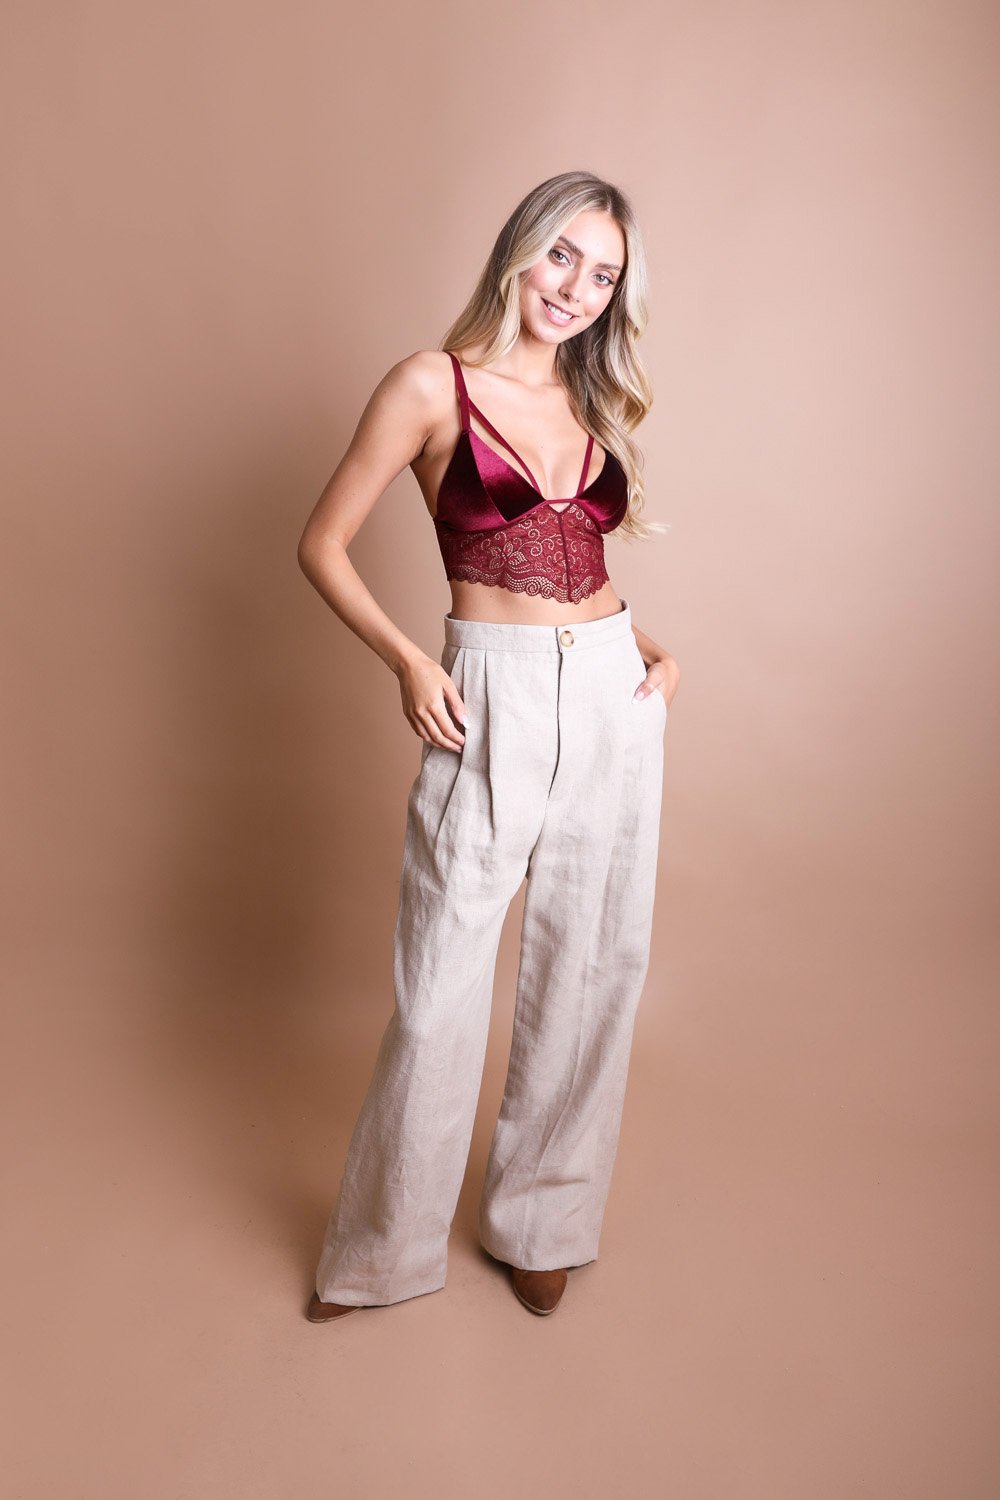 Waistband Loop Lace Brami $22 – Thank you - Leto Collection